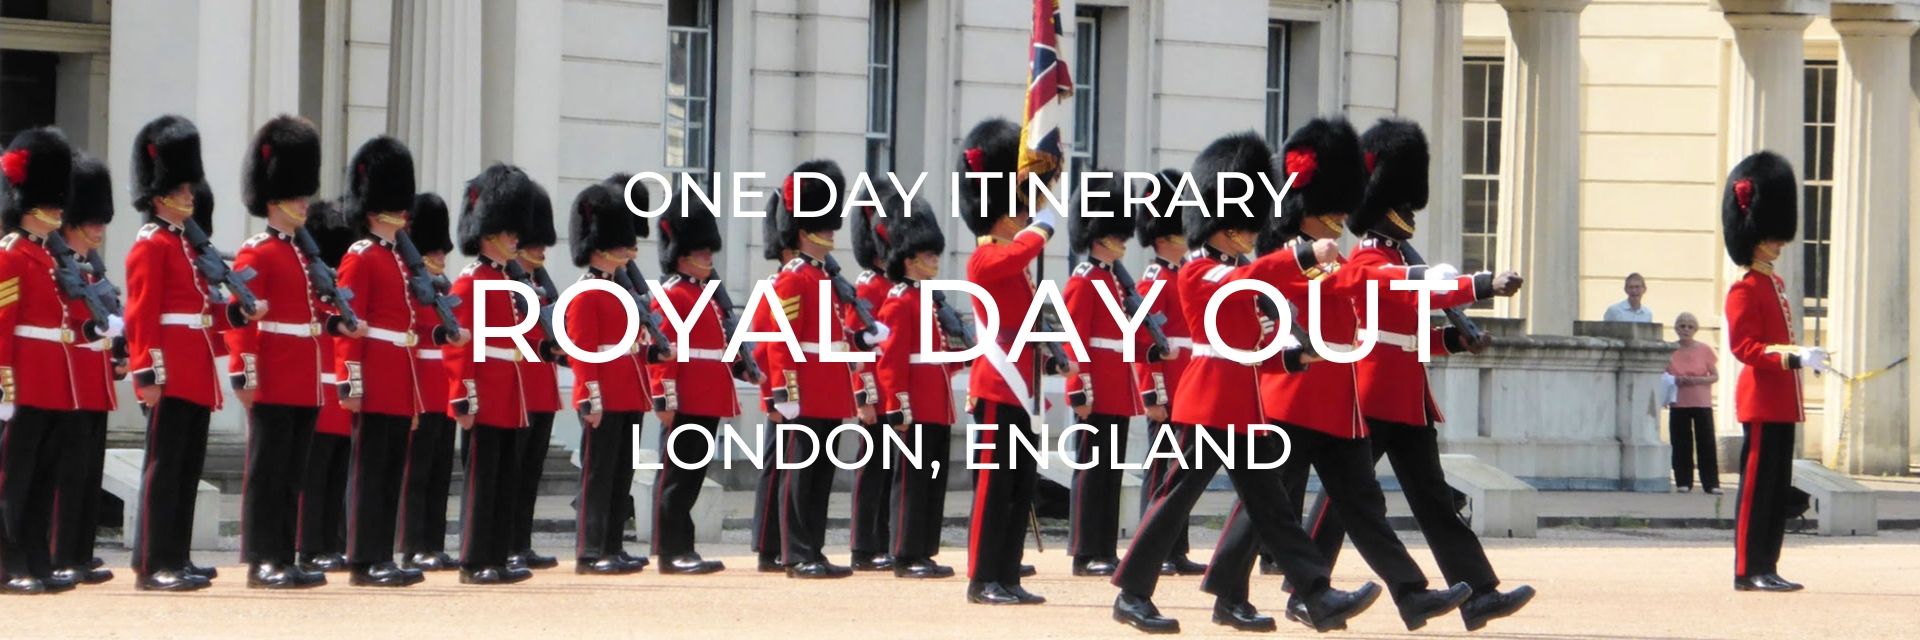 A Royal Day Out in London Desktop Header